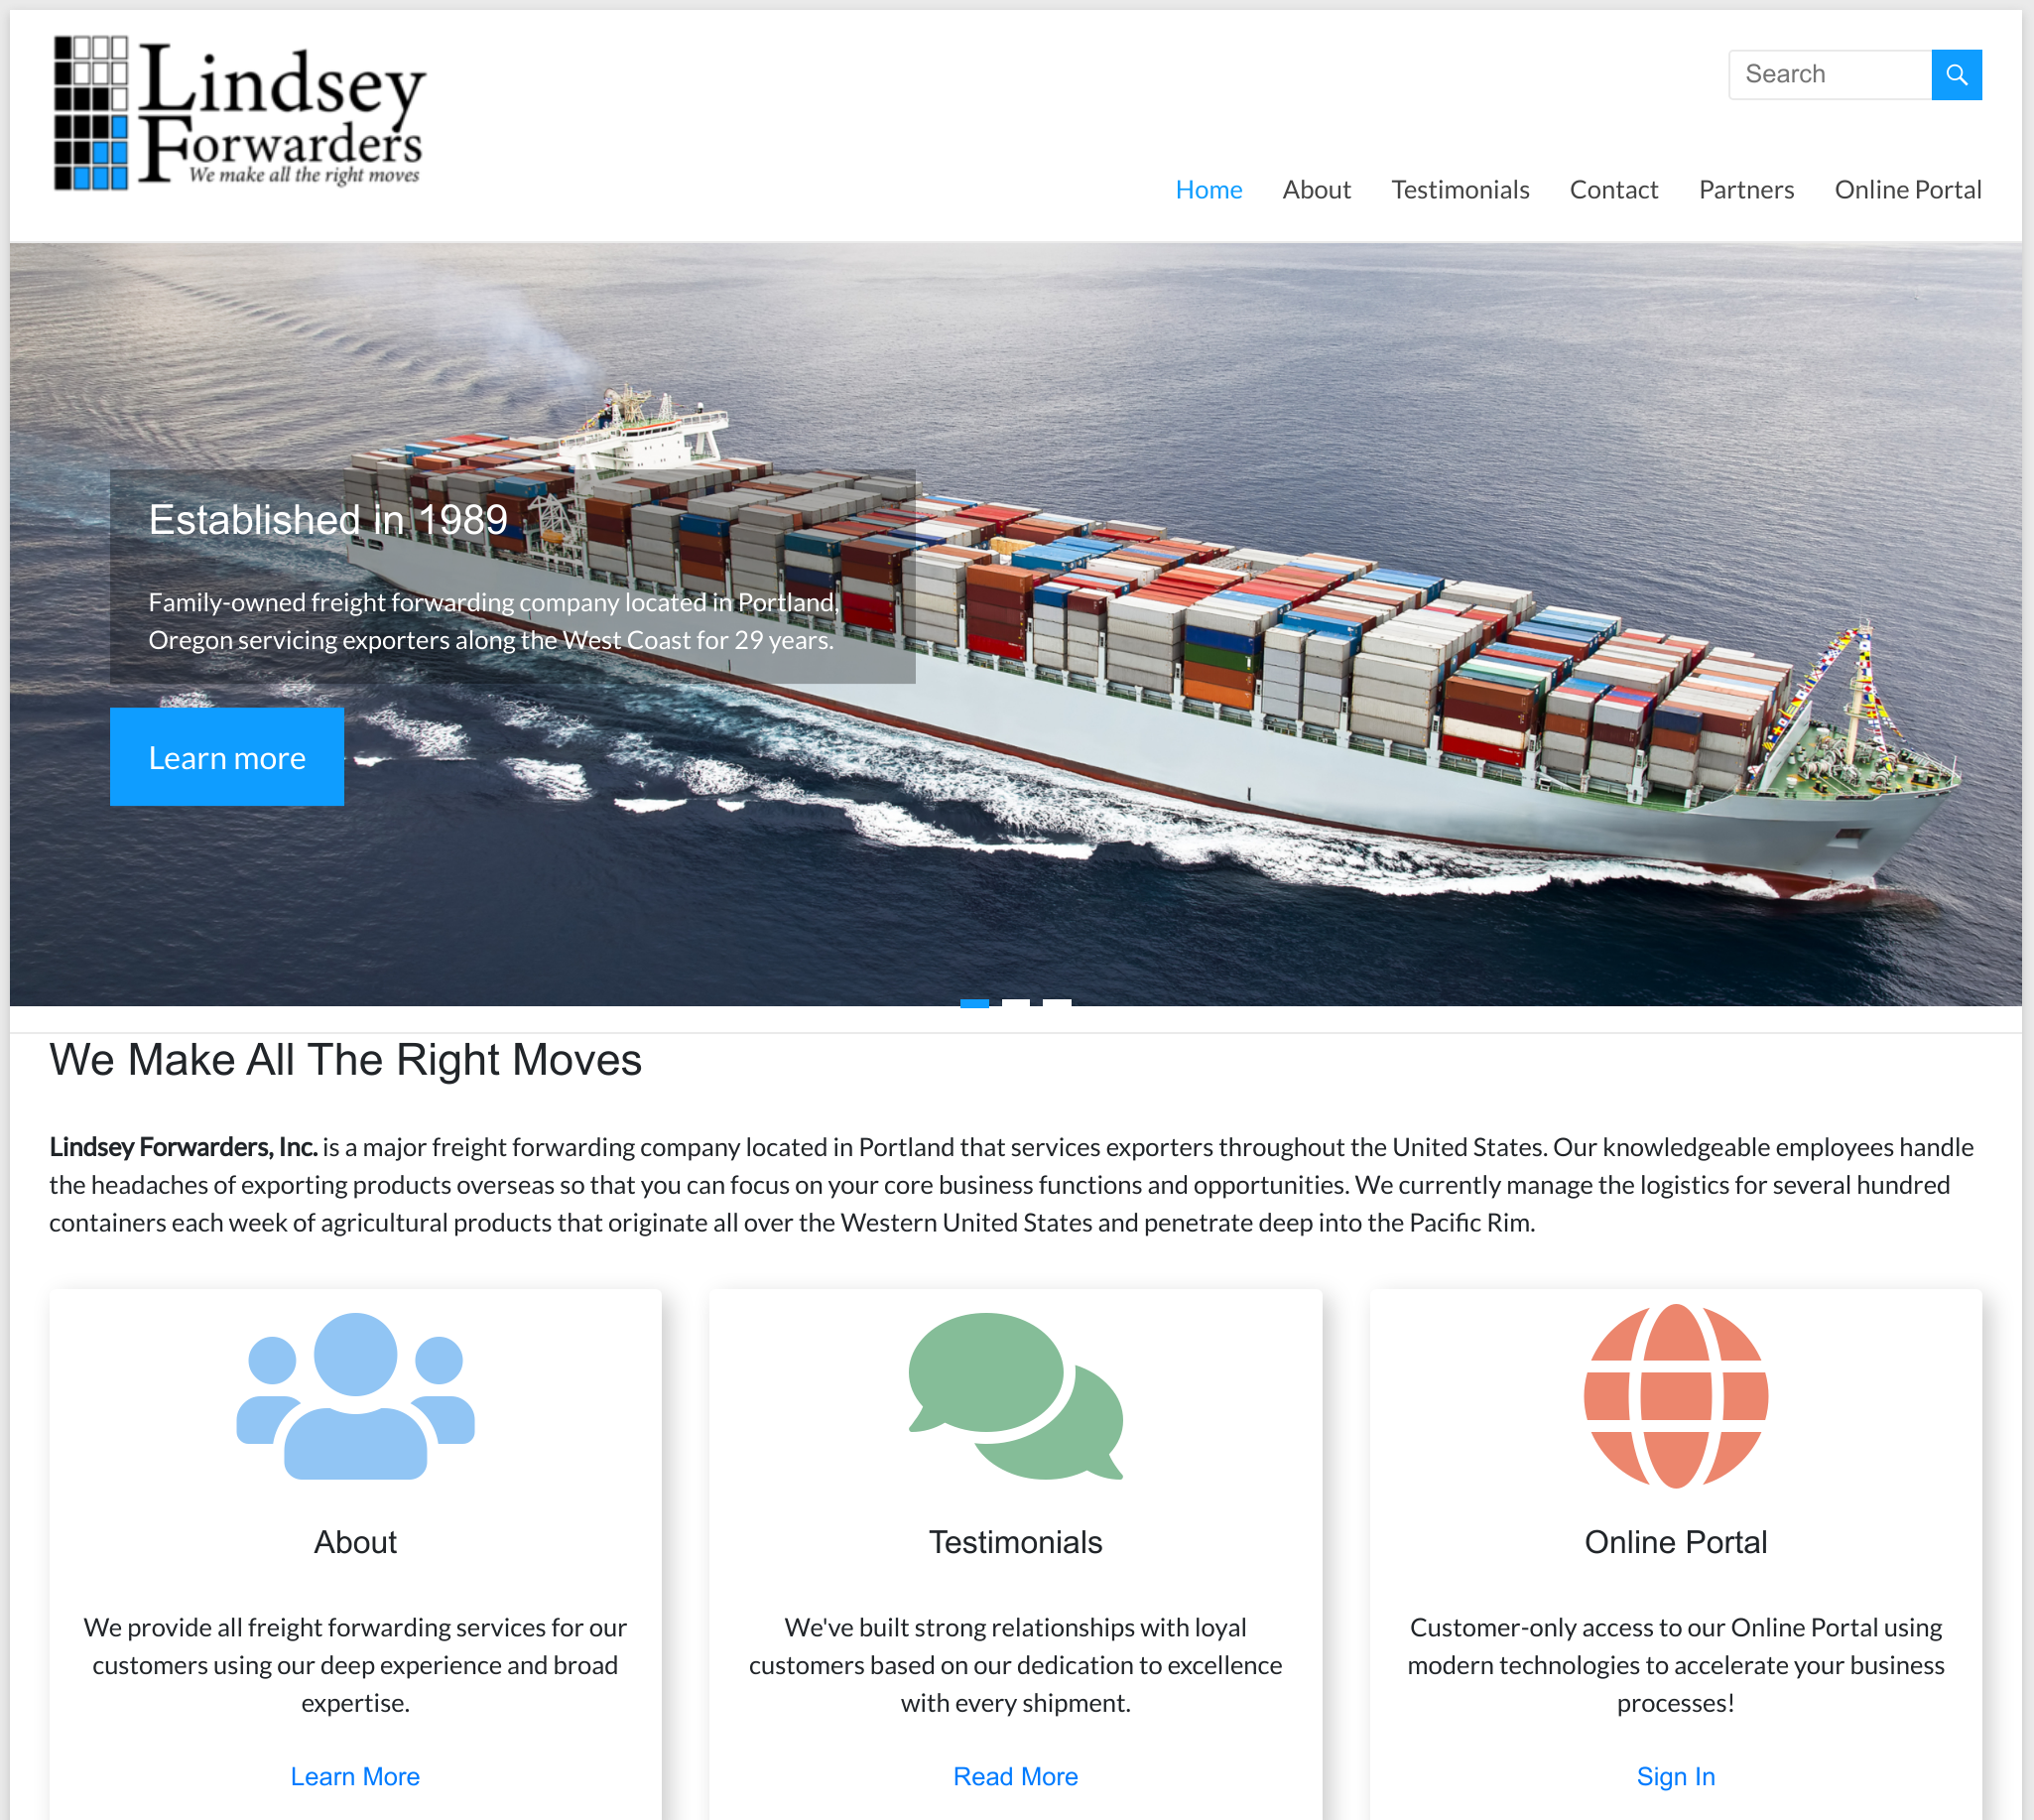 Lindsey Forwarders home page